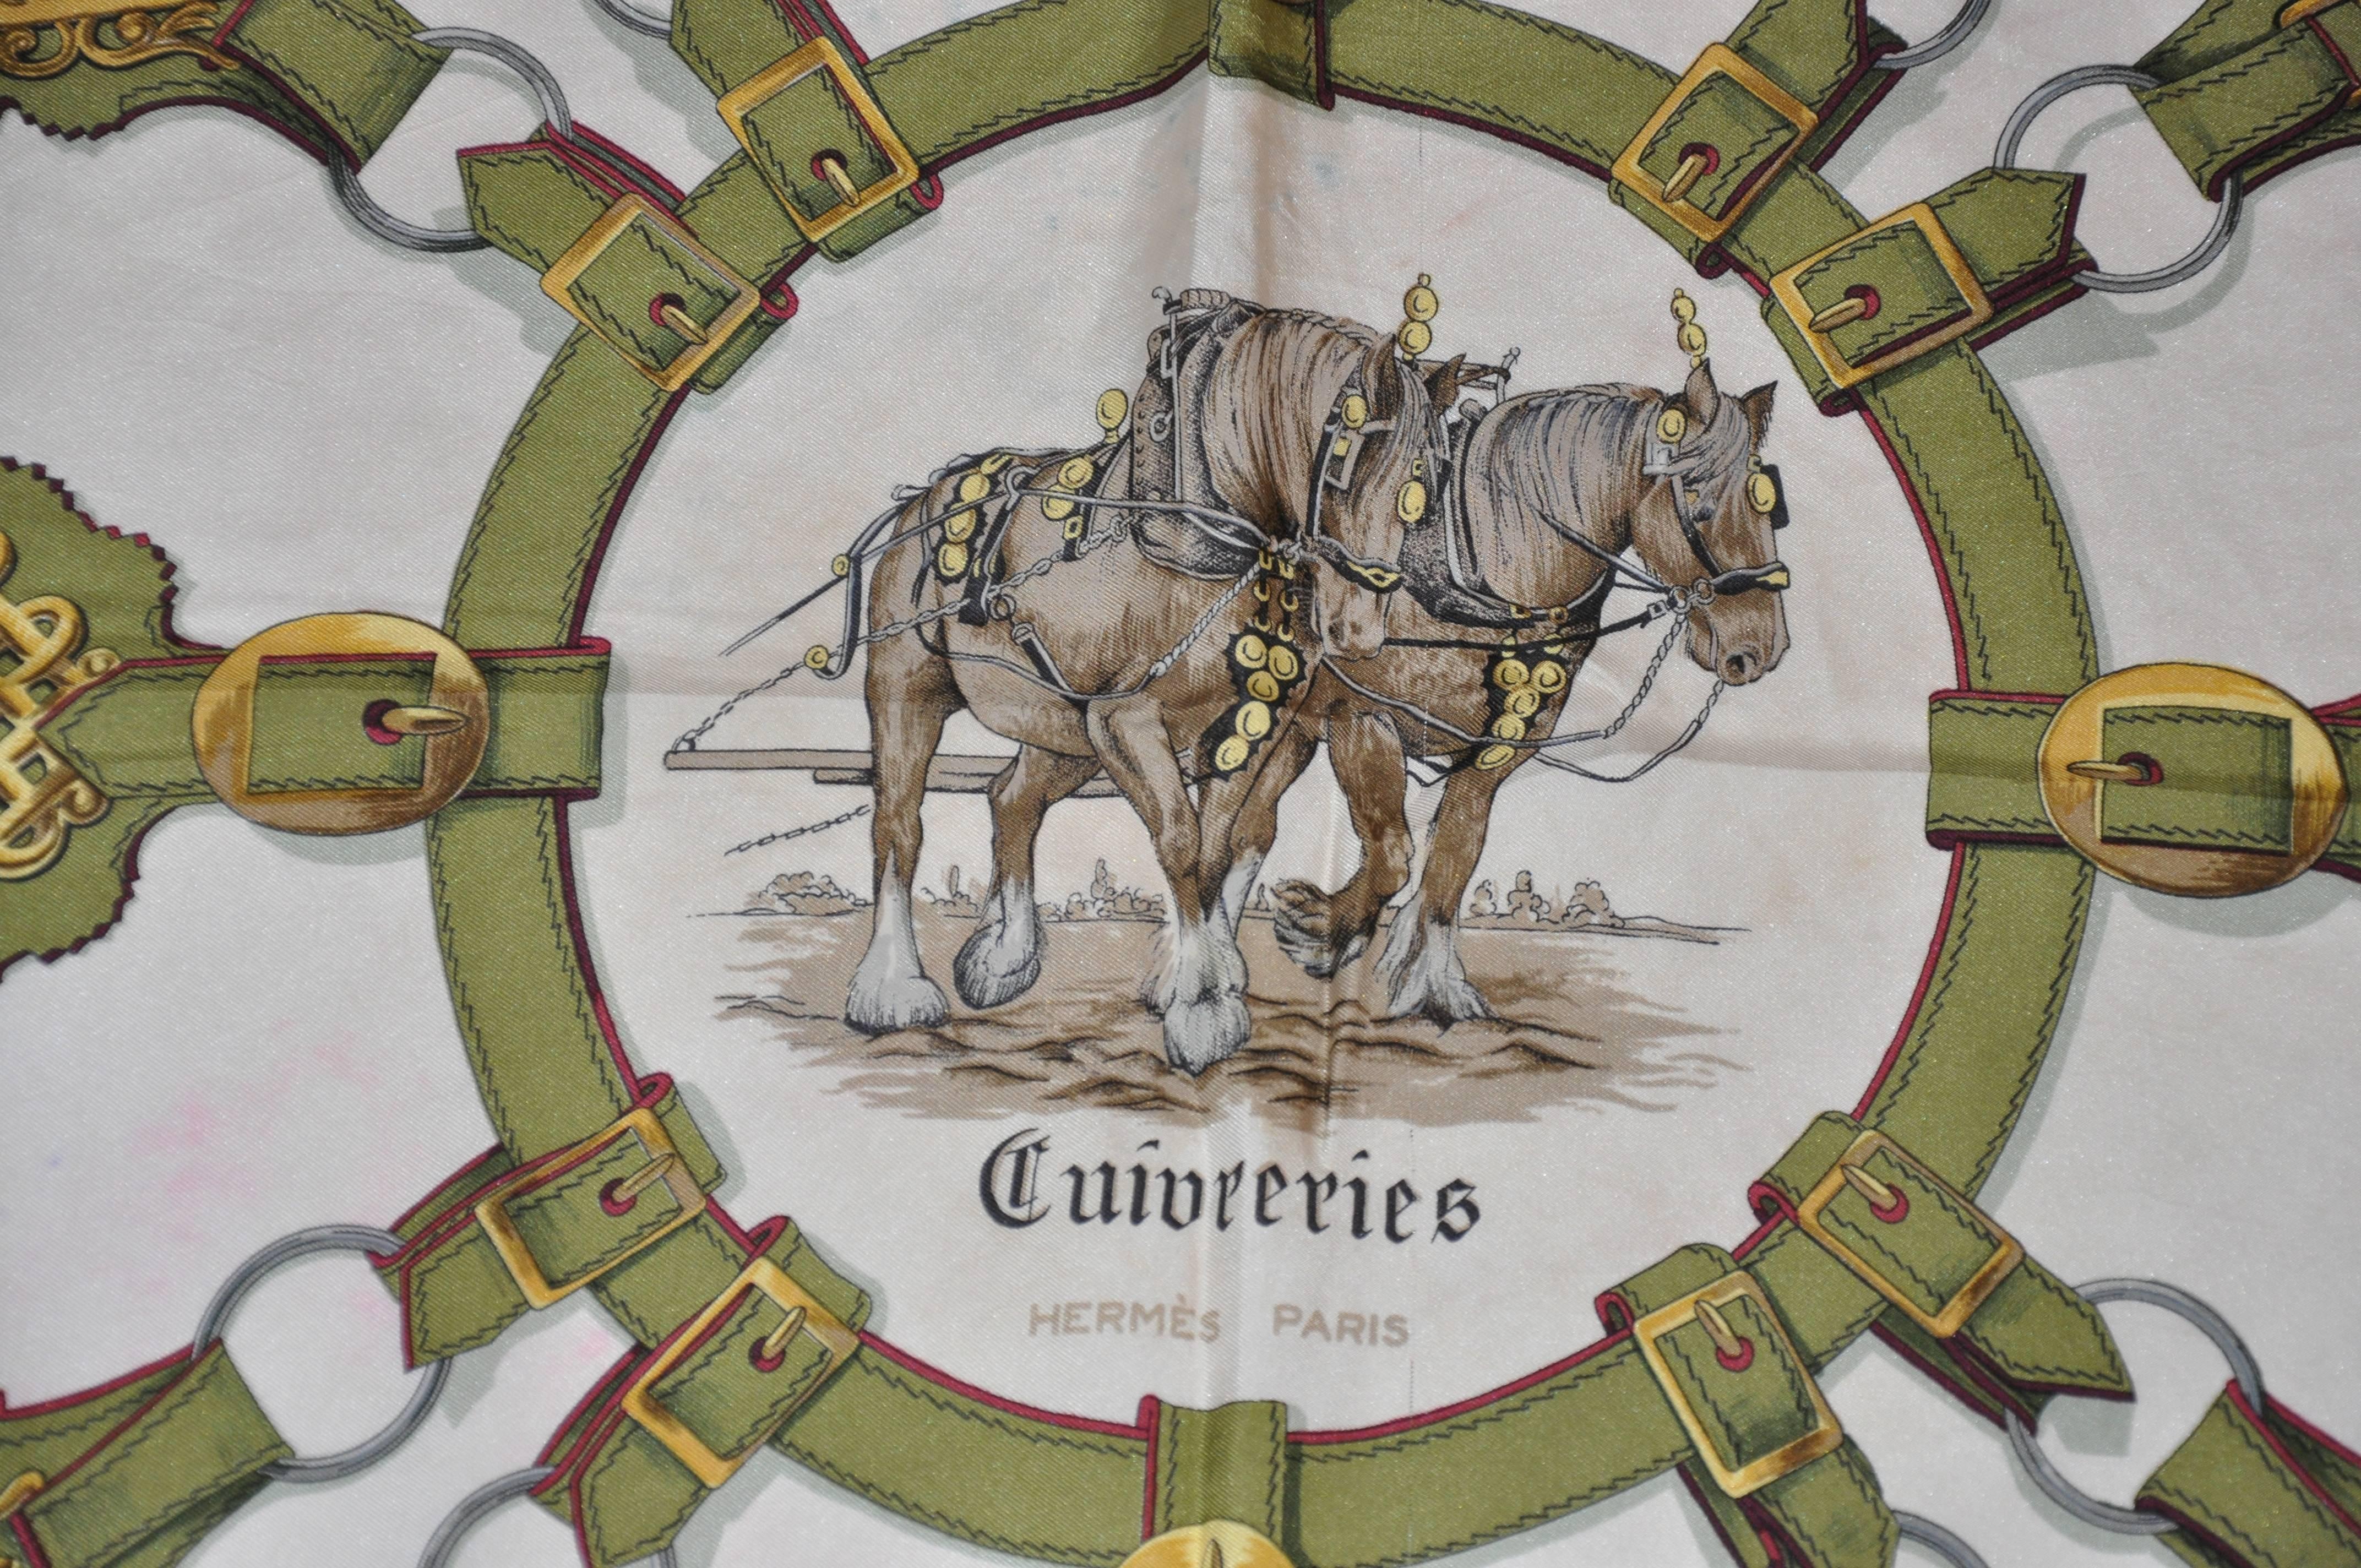 Hermes "Guivreries" designed by F. de la Perriere silk jacquard scarf measures 34" x 35" and finished with hand-rolled edges. Made in France. Condition is fair.